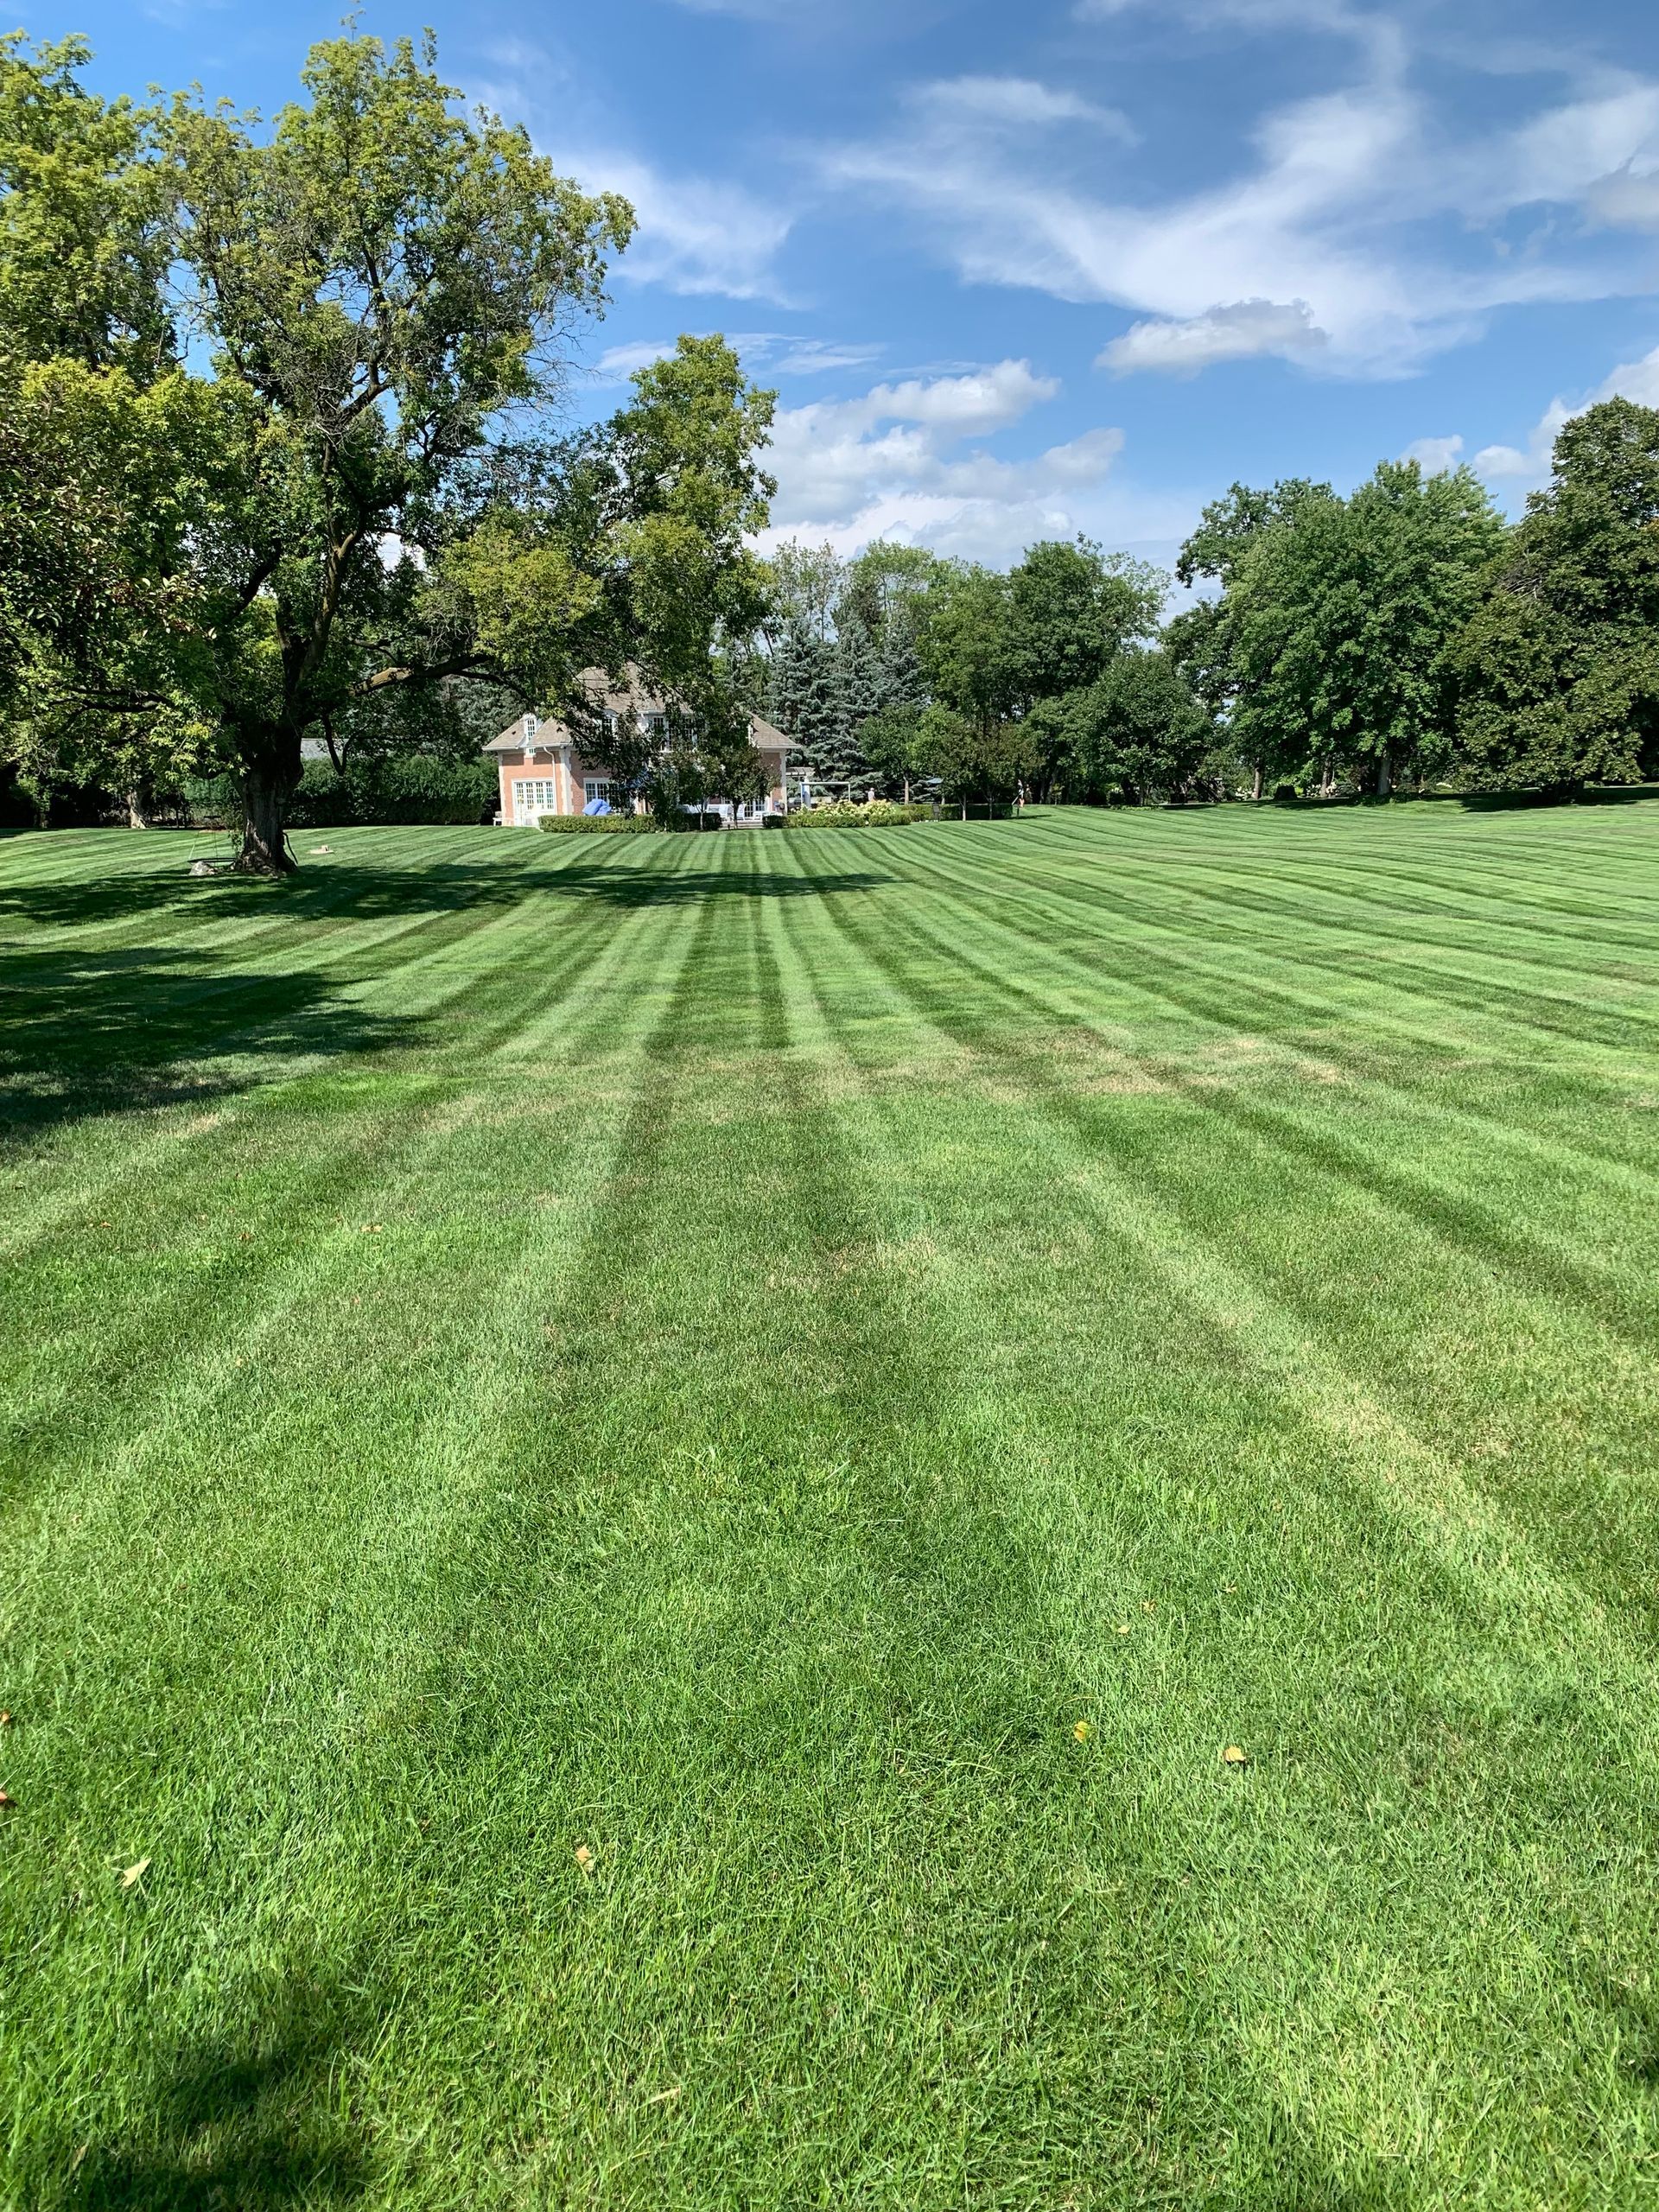 Picture of a large lawn that was cut perfectly. You can see the freshly mowed grass cut in perfectly straight lines. There is a tree line toward the left and right of the image border and a home at the end of the image. You can also see the well-maintained lawn and landscape of this property here in Wayzata, MN.